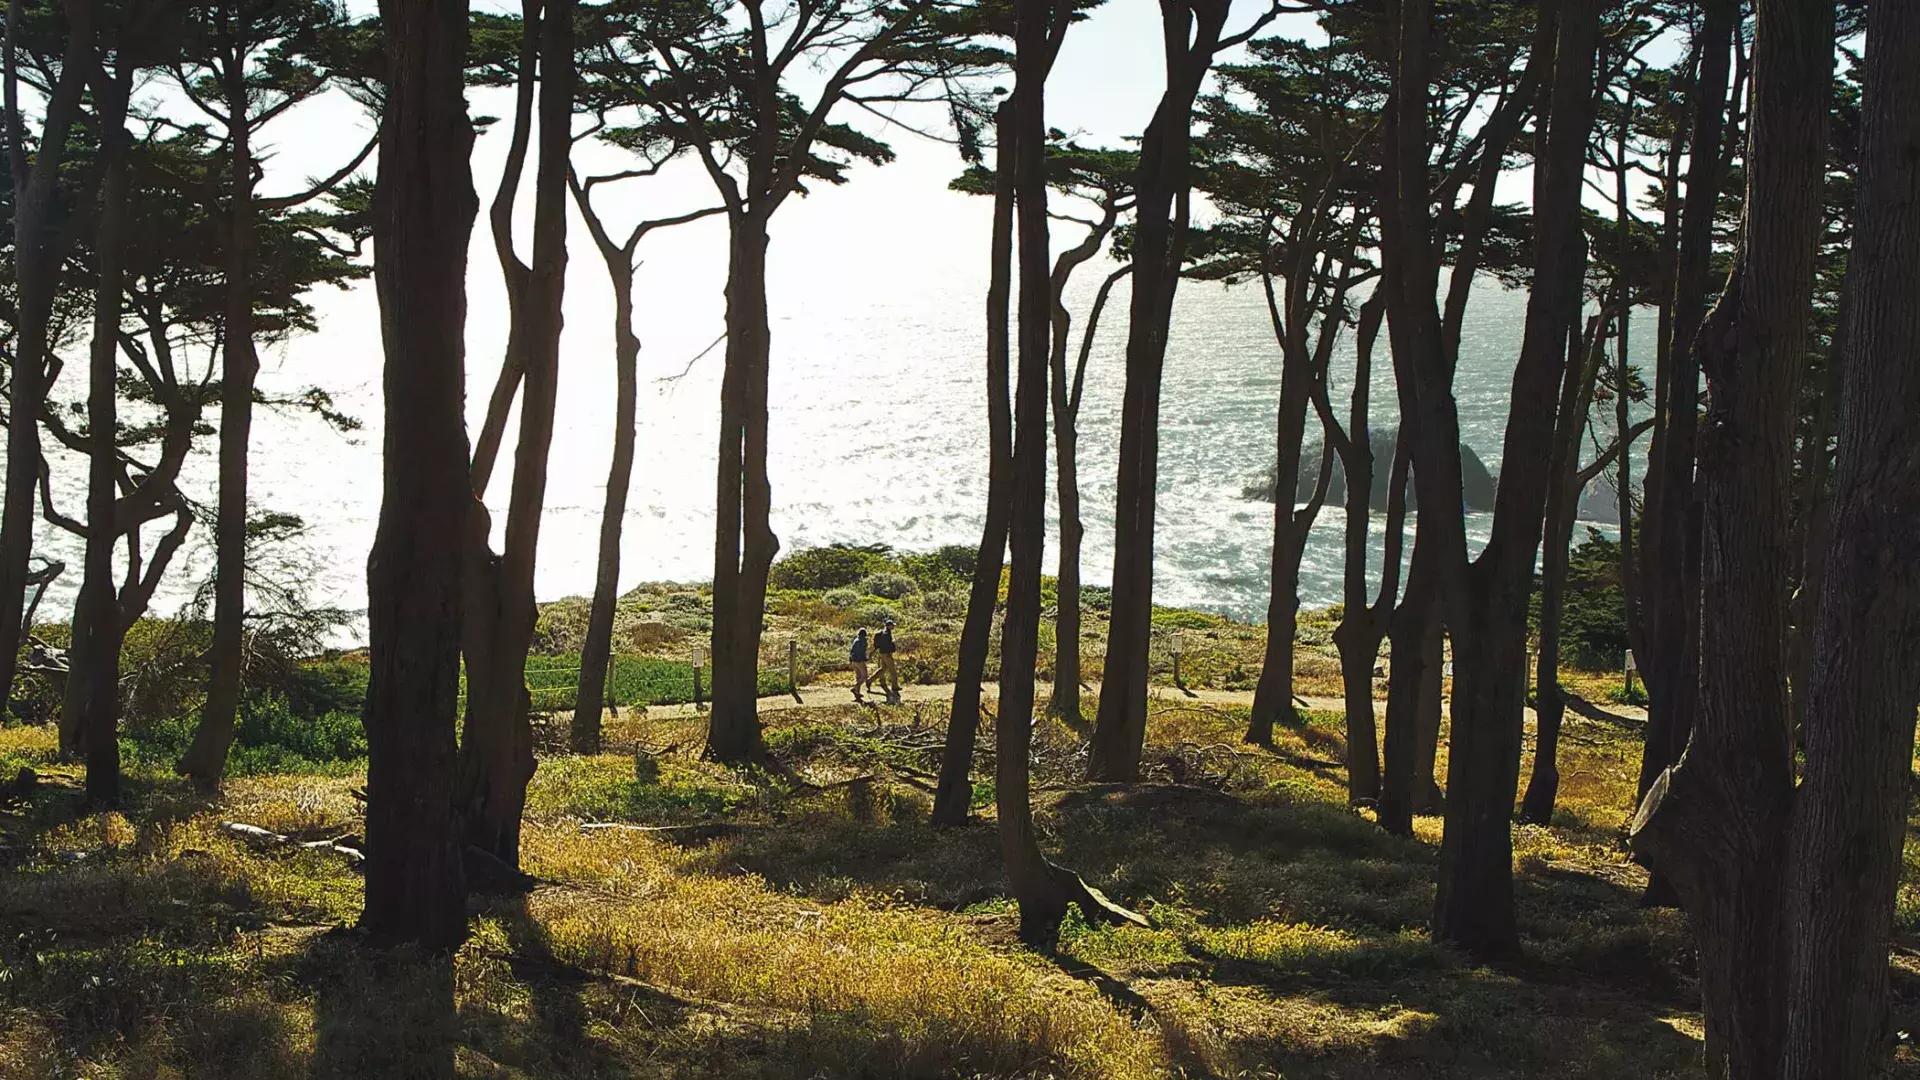 Hikers walk along a forested section of Lands End Trail, with the Pacific Ocean in the background.